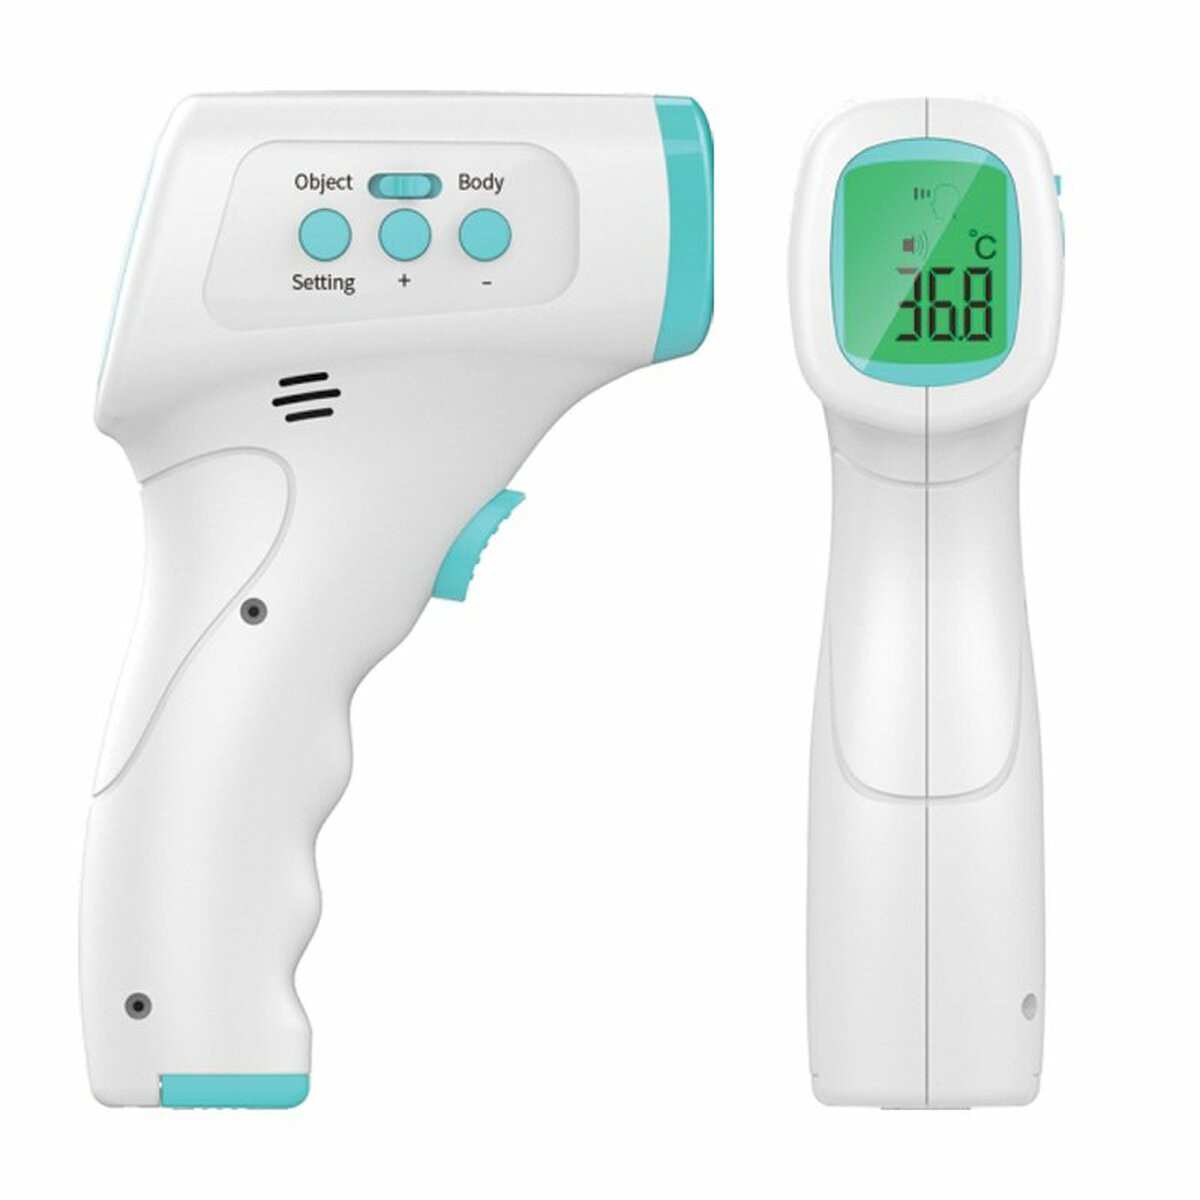 https://cdn11.bigcommerce.com/s-9q2m2xw7hz/images/stencil/1200x1200/products/168/484/jrt-infrared-thermometer-sets__94422.1616613332__43763.1629408052.jpg?c=1